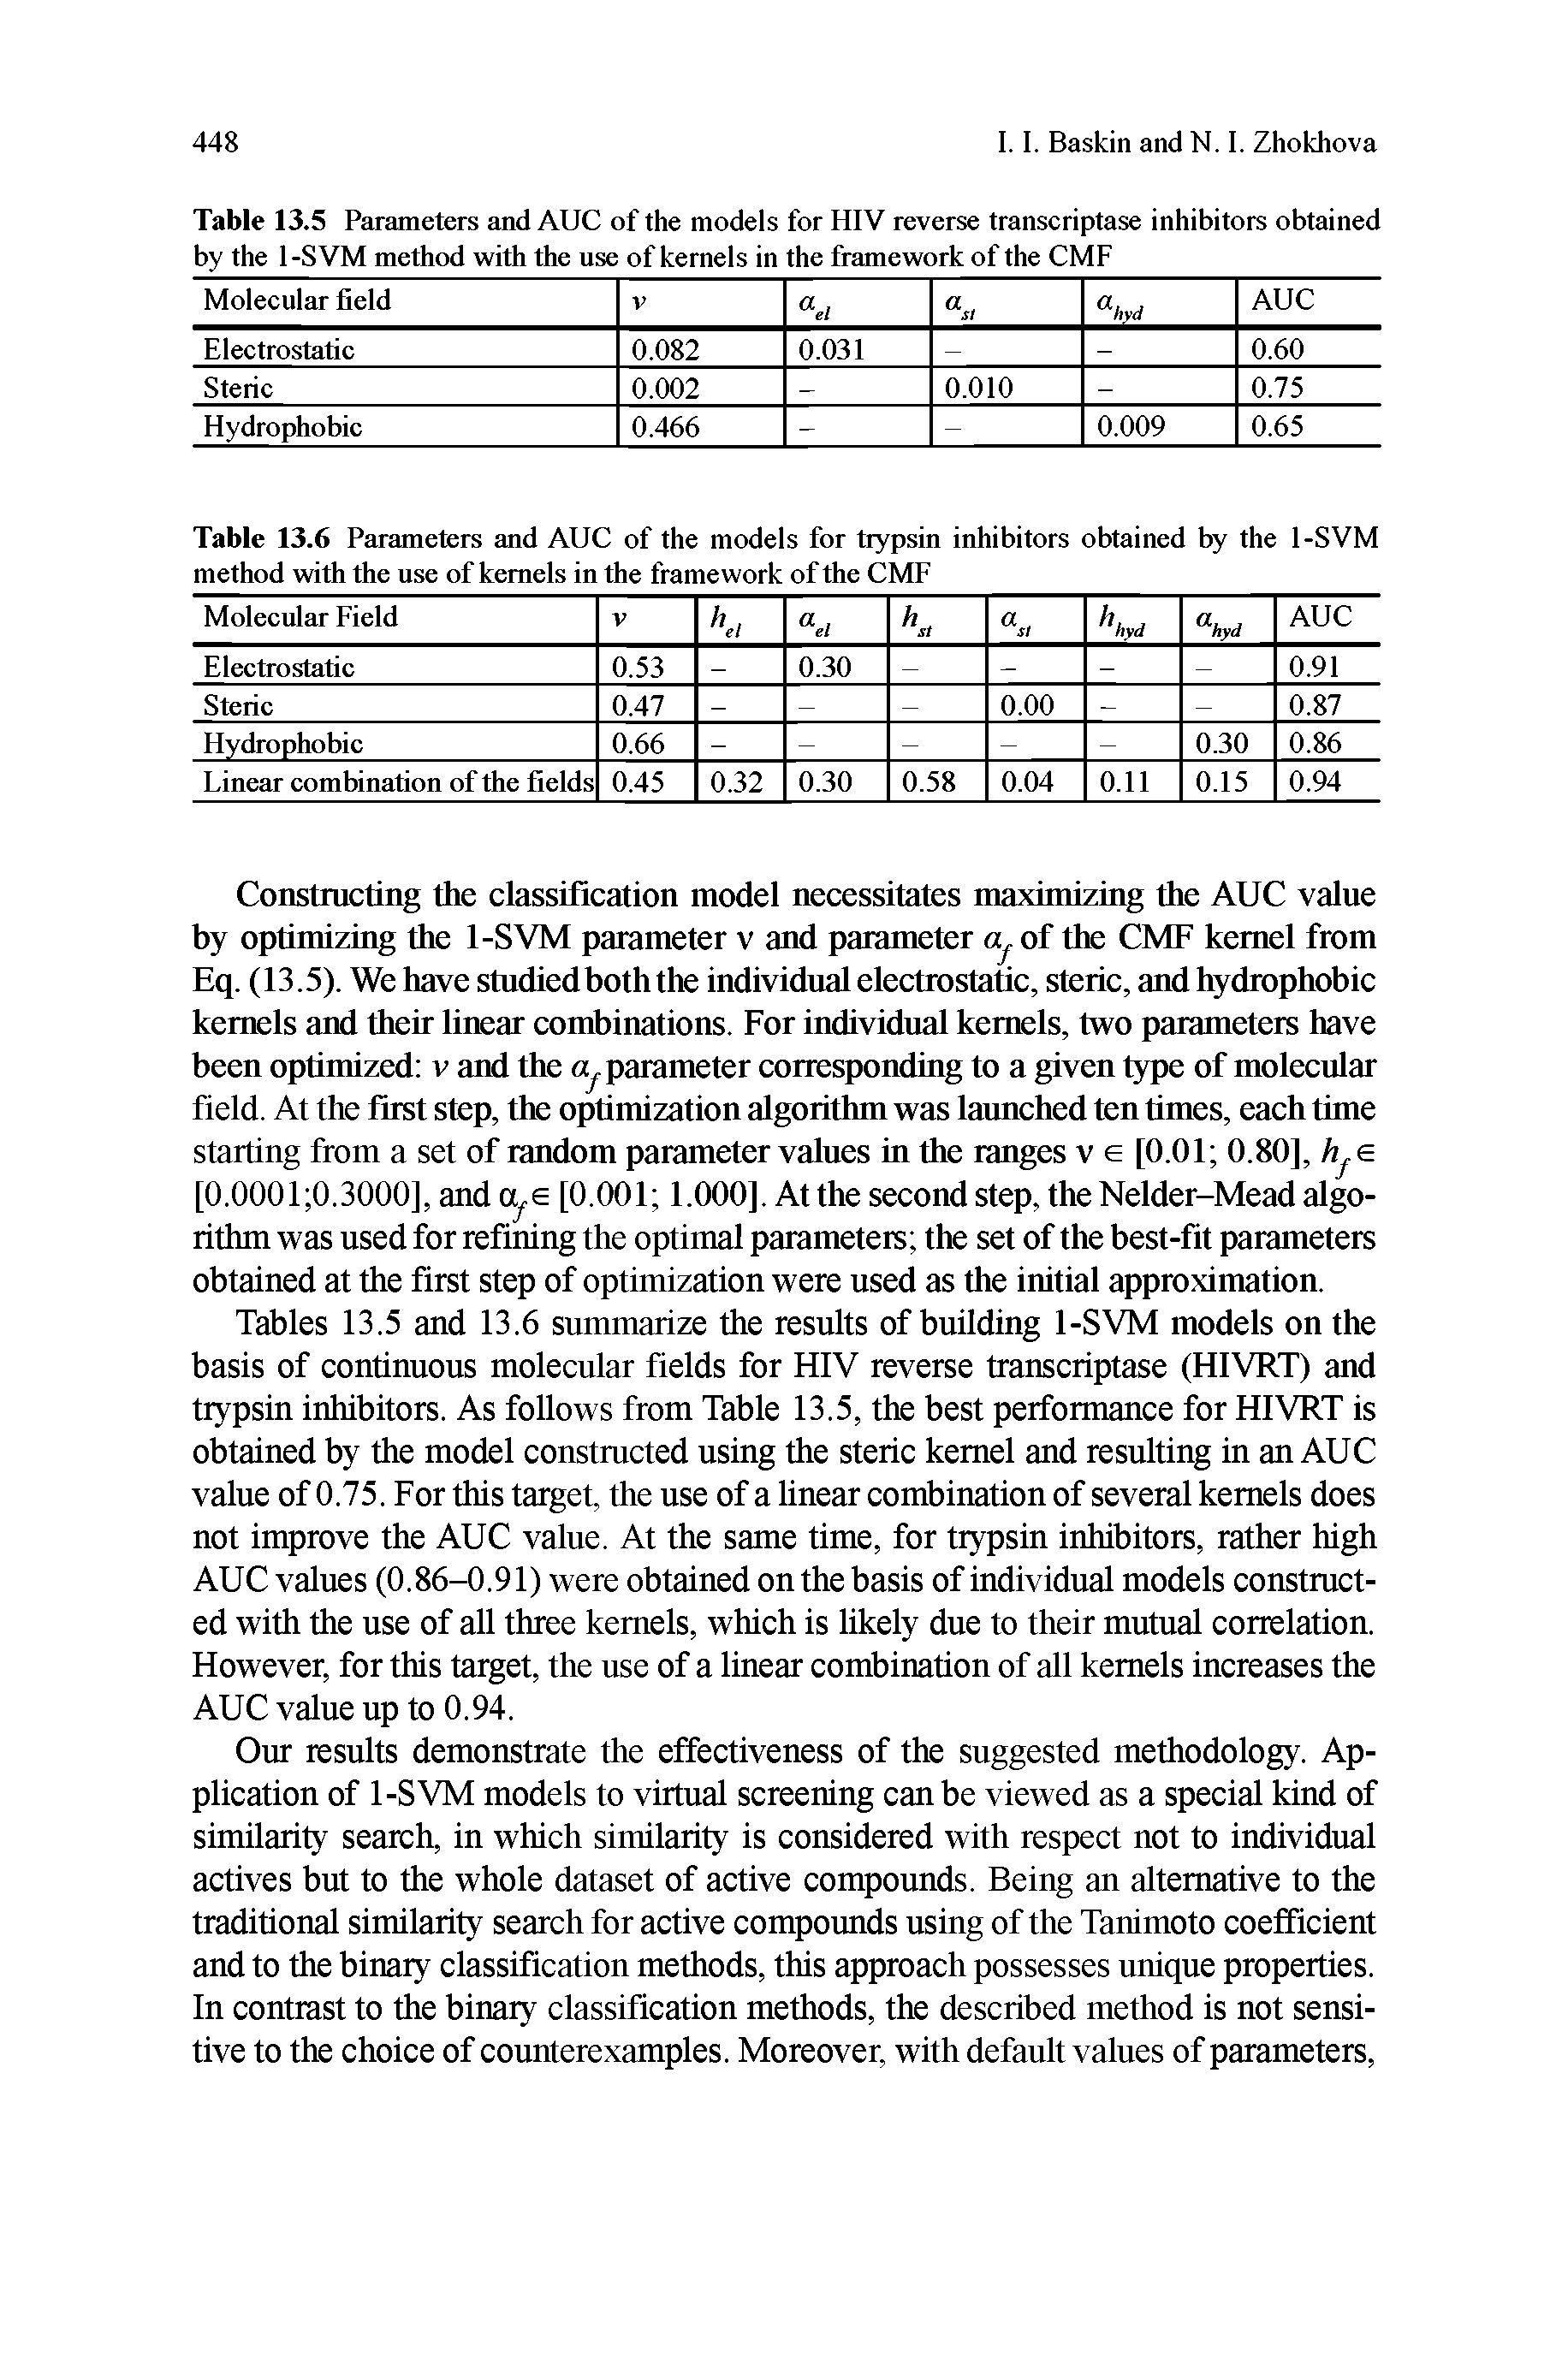 Tables 13.5 and 13.6 summarize the results of building 1-SVM models on the basis of continuous molecular fields for HIV reverse transcriptase (HIVRT) and trypsin inhibitors. As follows from Table 13.5, the best performance for HIVRT is obtained by the model constracted using the steric kernel and resulting in an AUC value of 0.75. For this target, the use of a hnear combination of several kernels does not improve the AUC value. At the same time, for trypsin inhibitors, rather high AUC values (0.86-0.91) were obtained on the basis of individual models constructed with the use of all three kernels, which is likely due to their mutual correlation. However, for this target, the use of a linear combination of all kernels increases the AUC value up to 0.94.